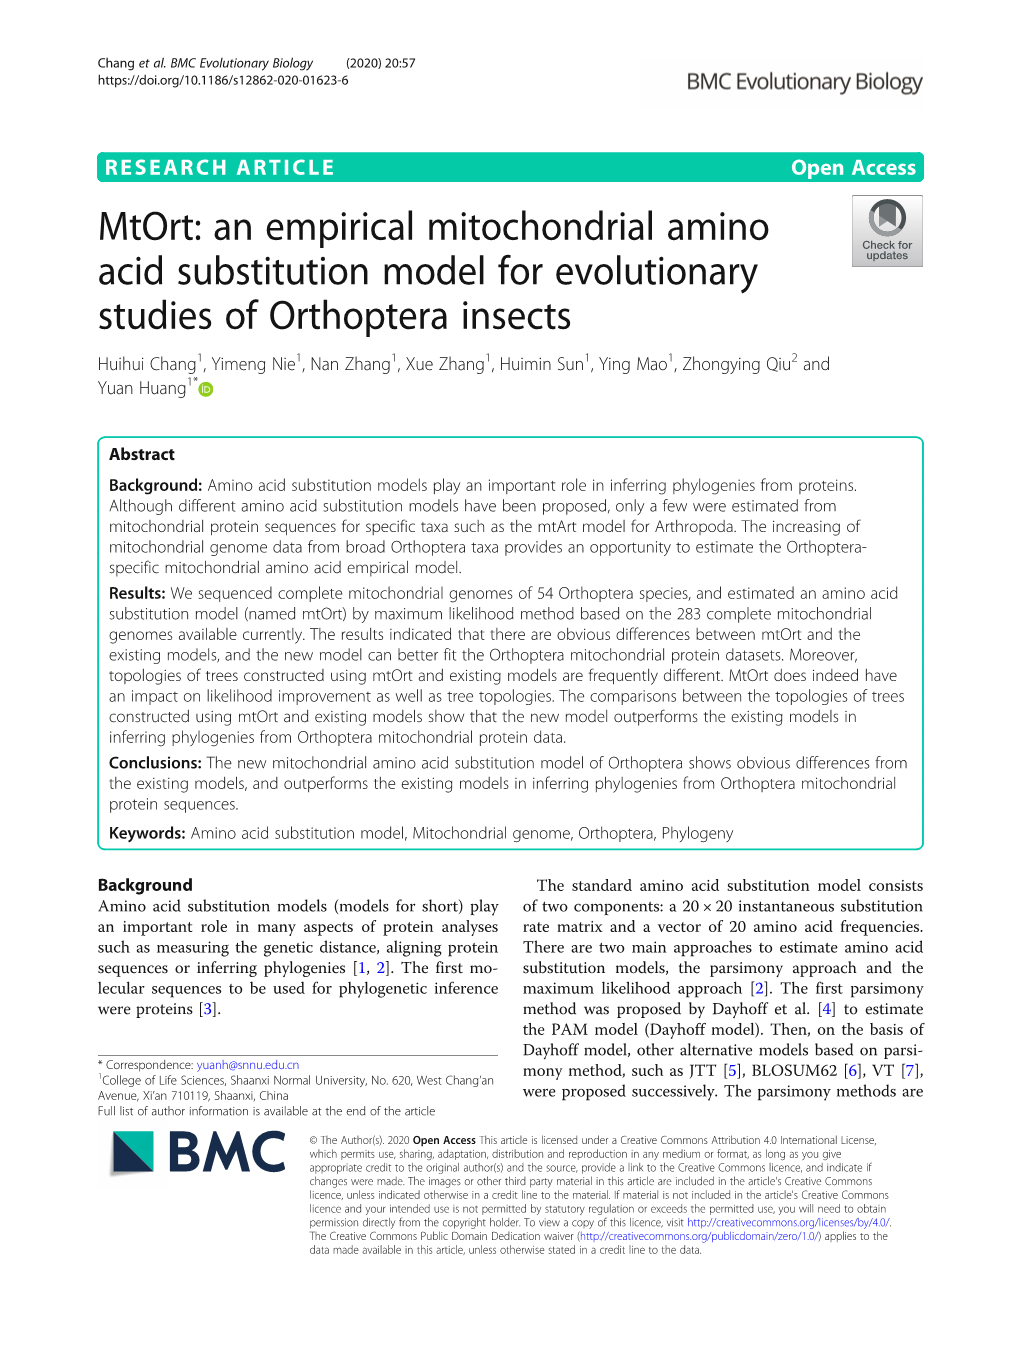 An Empirical Mitochondrial Amino Acid Substitution Model for Evolutionary